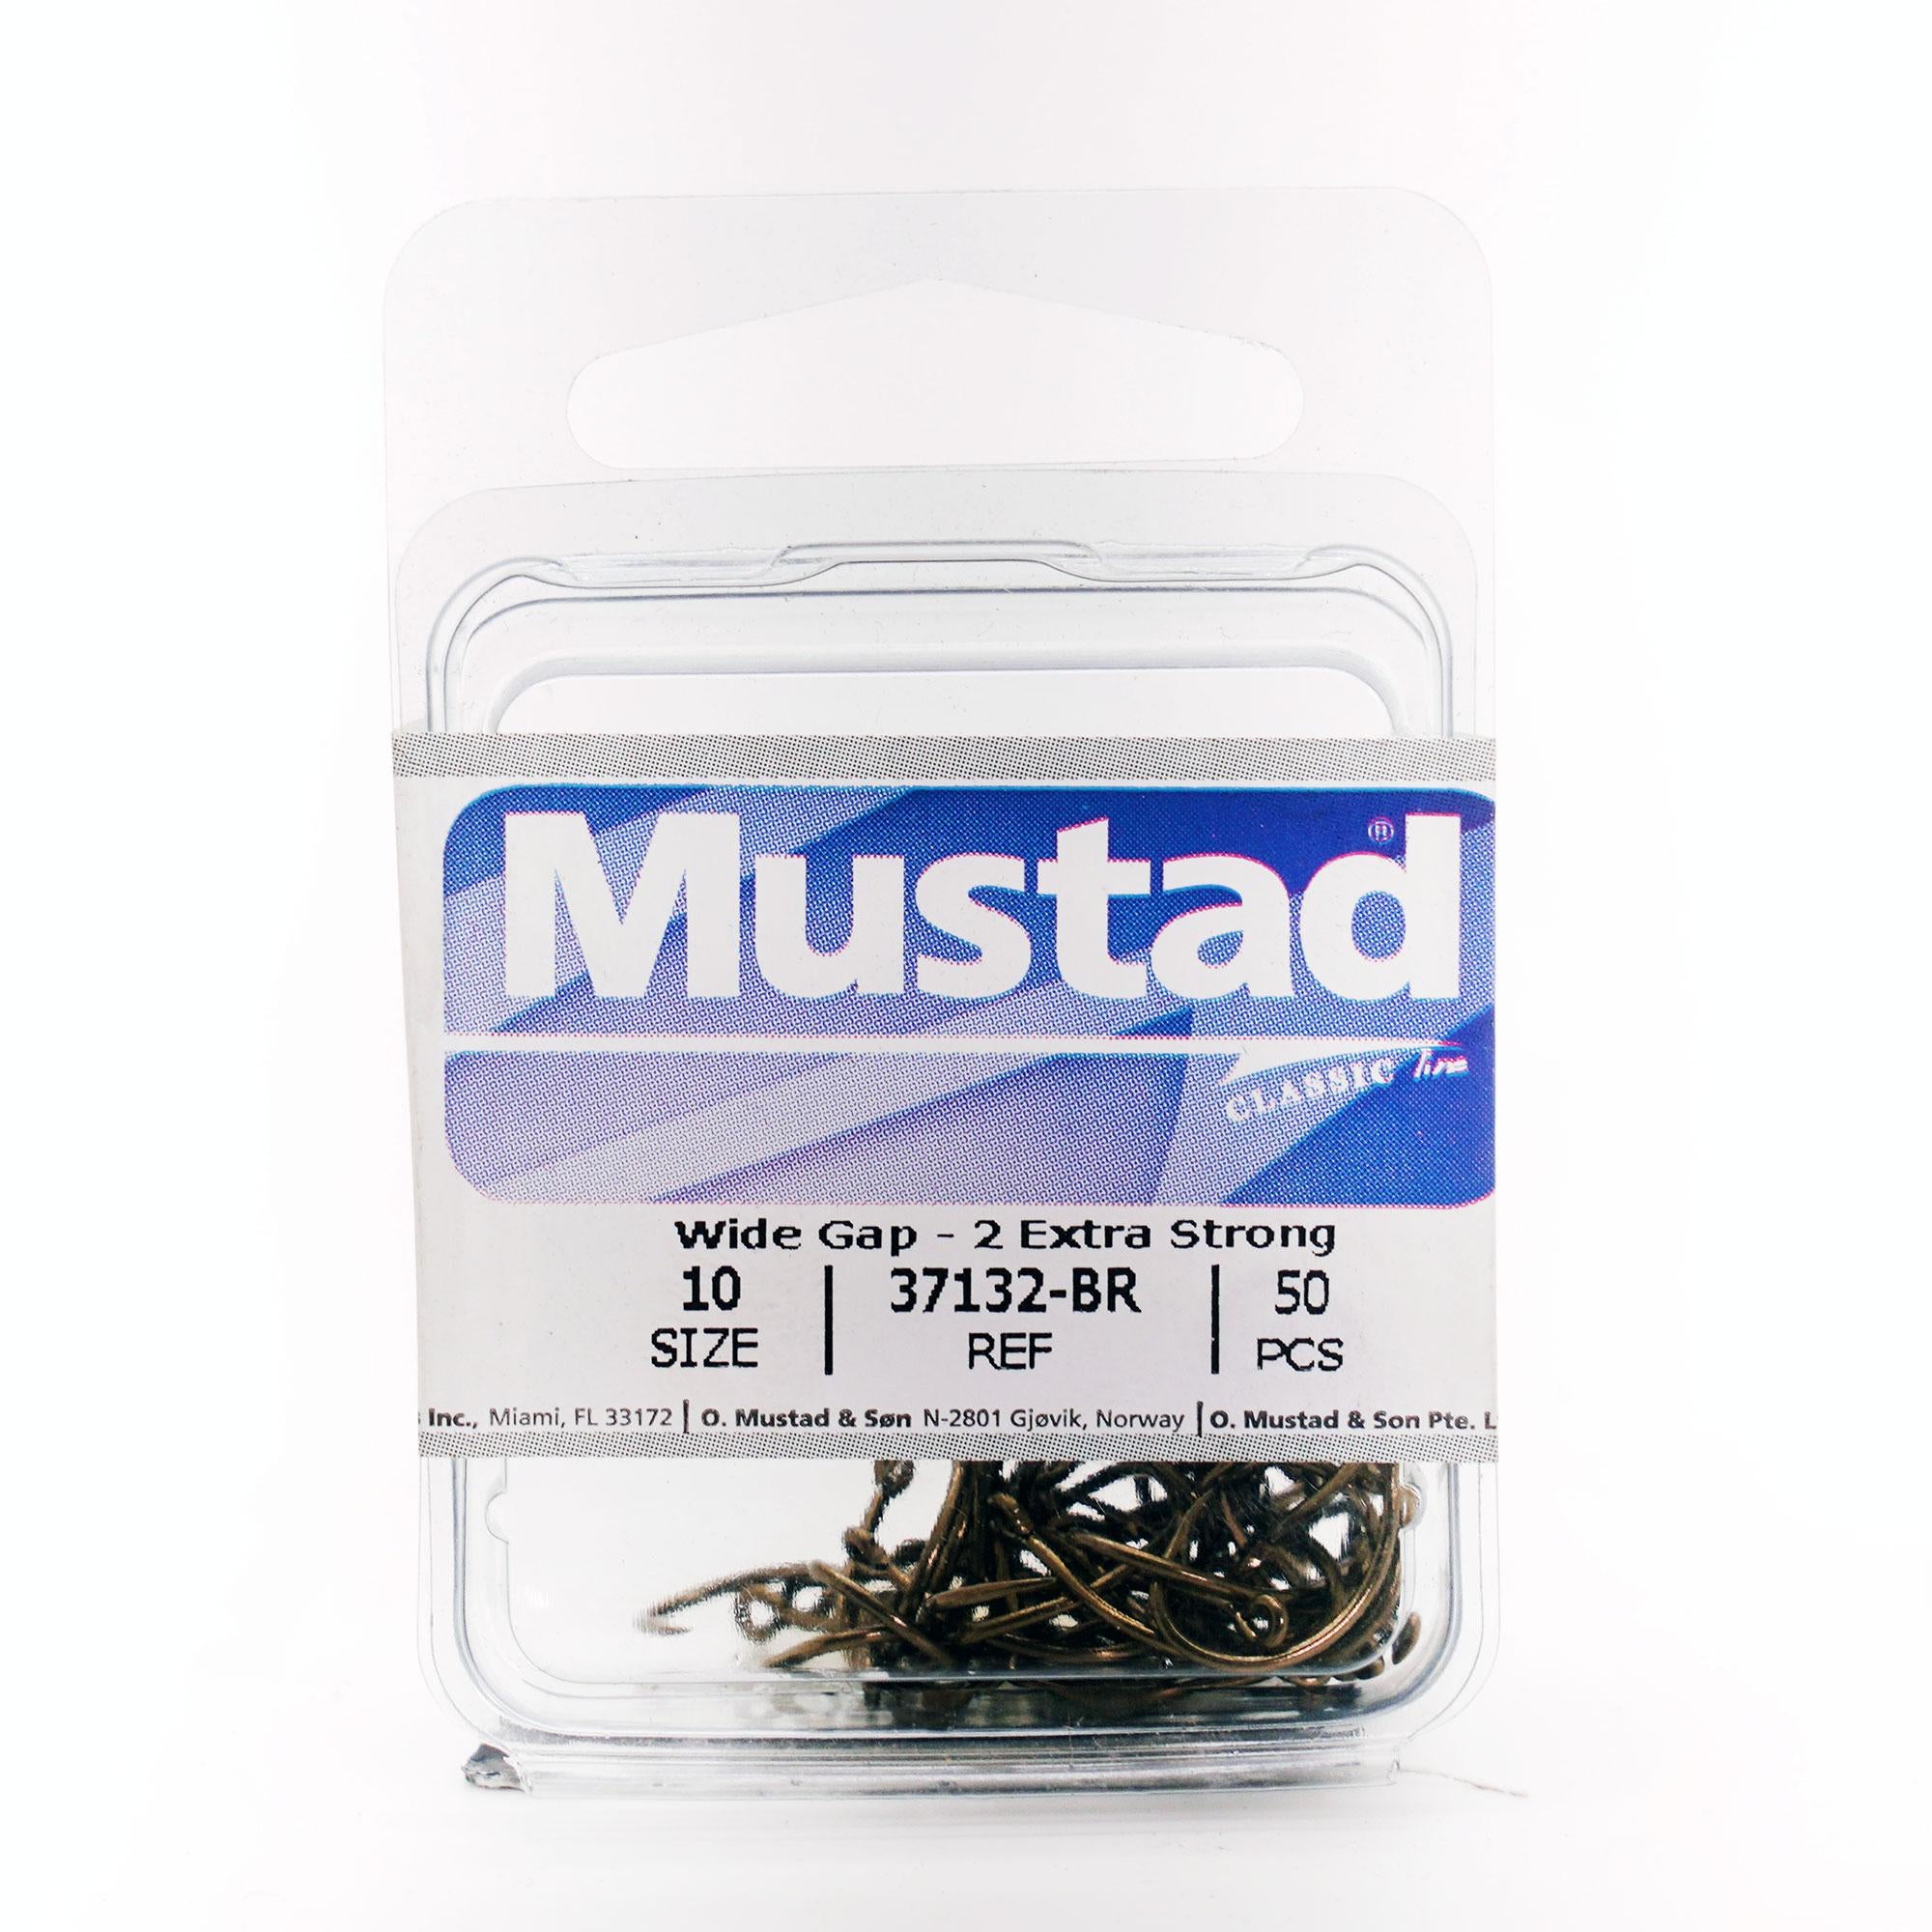 Mustad 37140 Wide Gap Classic Hook, Hollow Point, Slightly Reversed - 50  Per Pack 